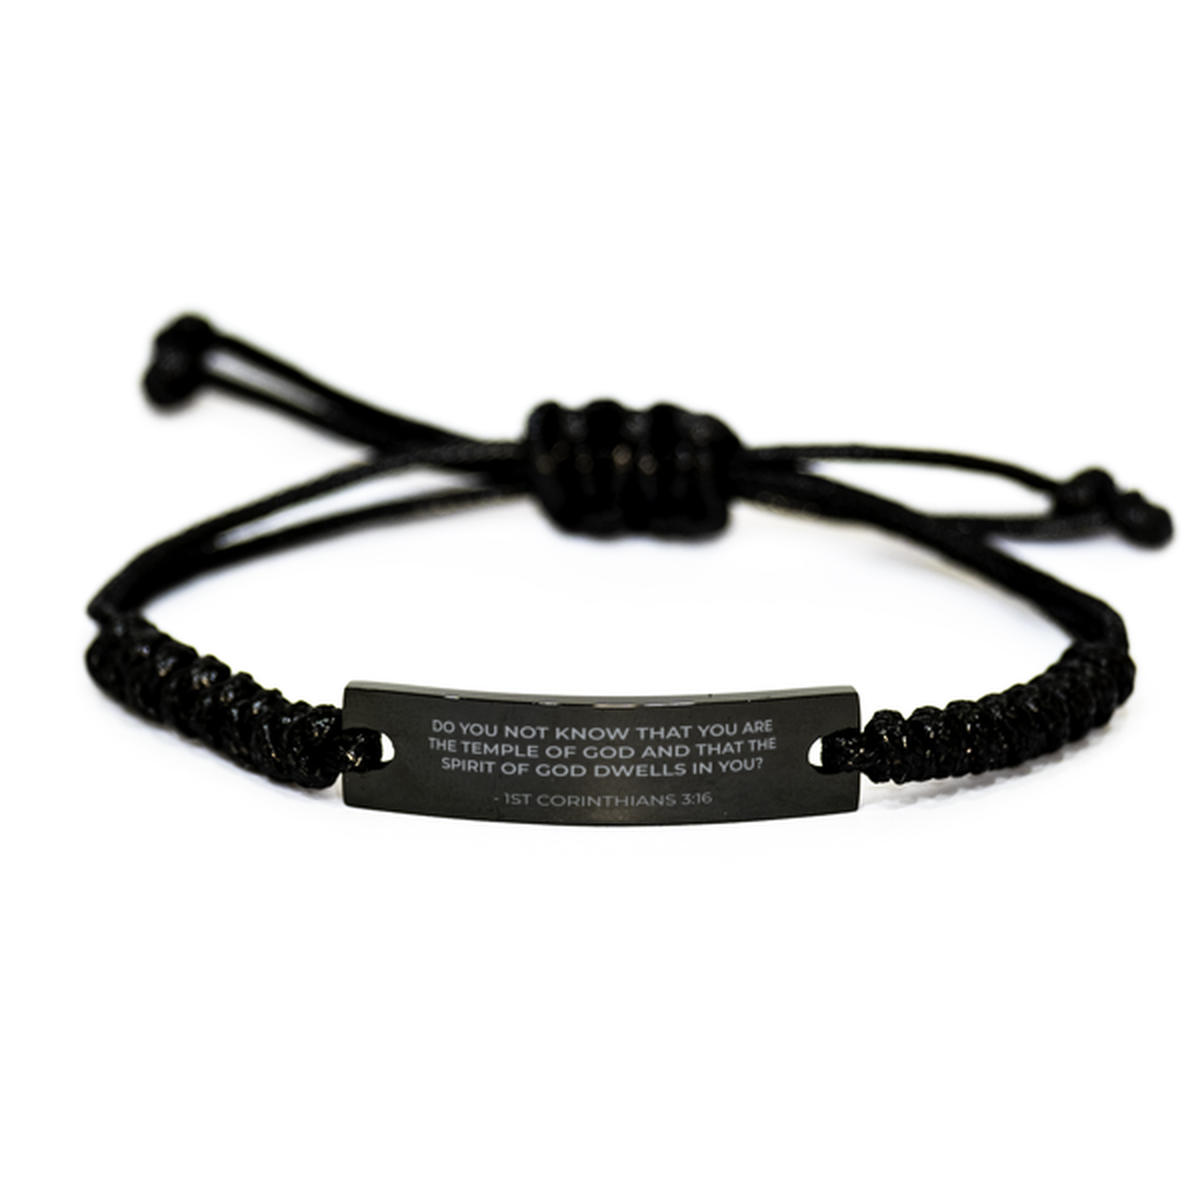 Bible Verse Rope Bracelet, 1St Corinthians 3:16 Do You Not Know That You Are The Temple, Christian Encouraging Gifts For Men Women Boys Girls